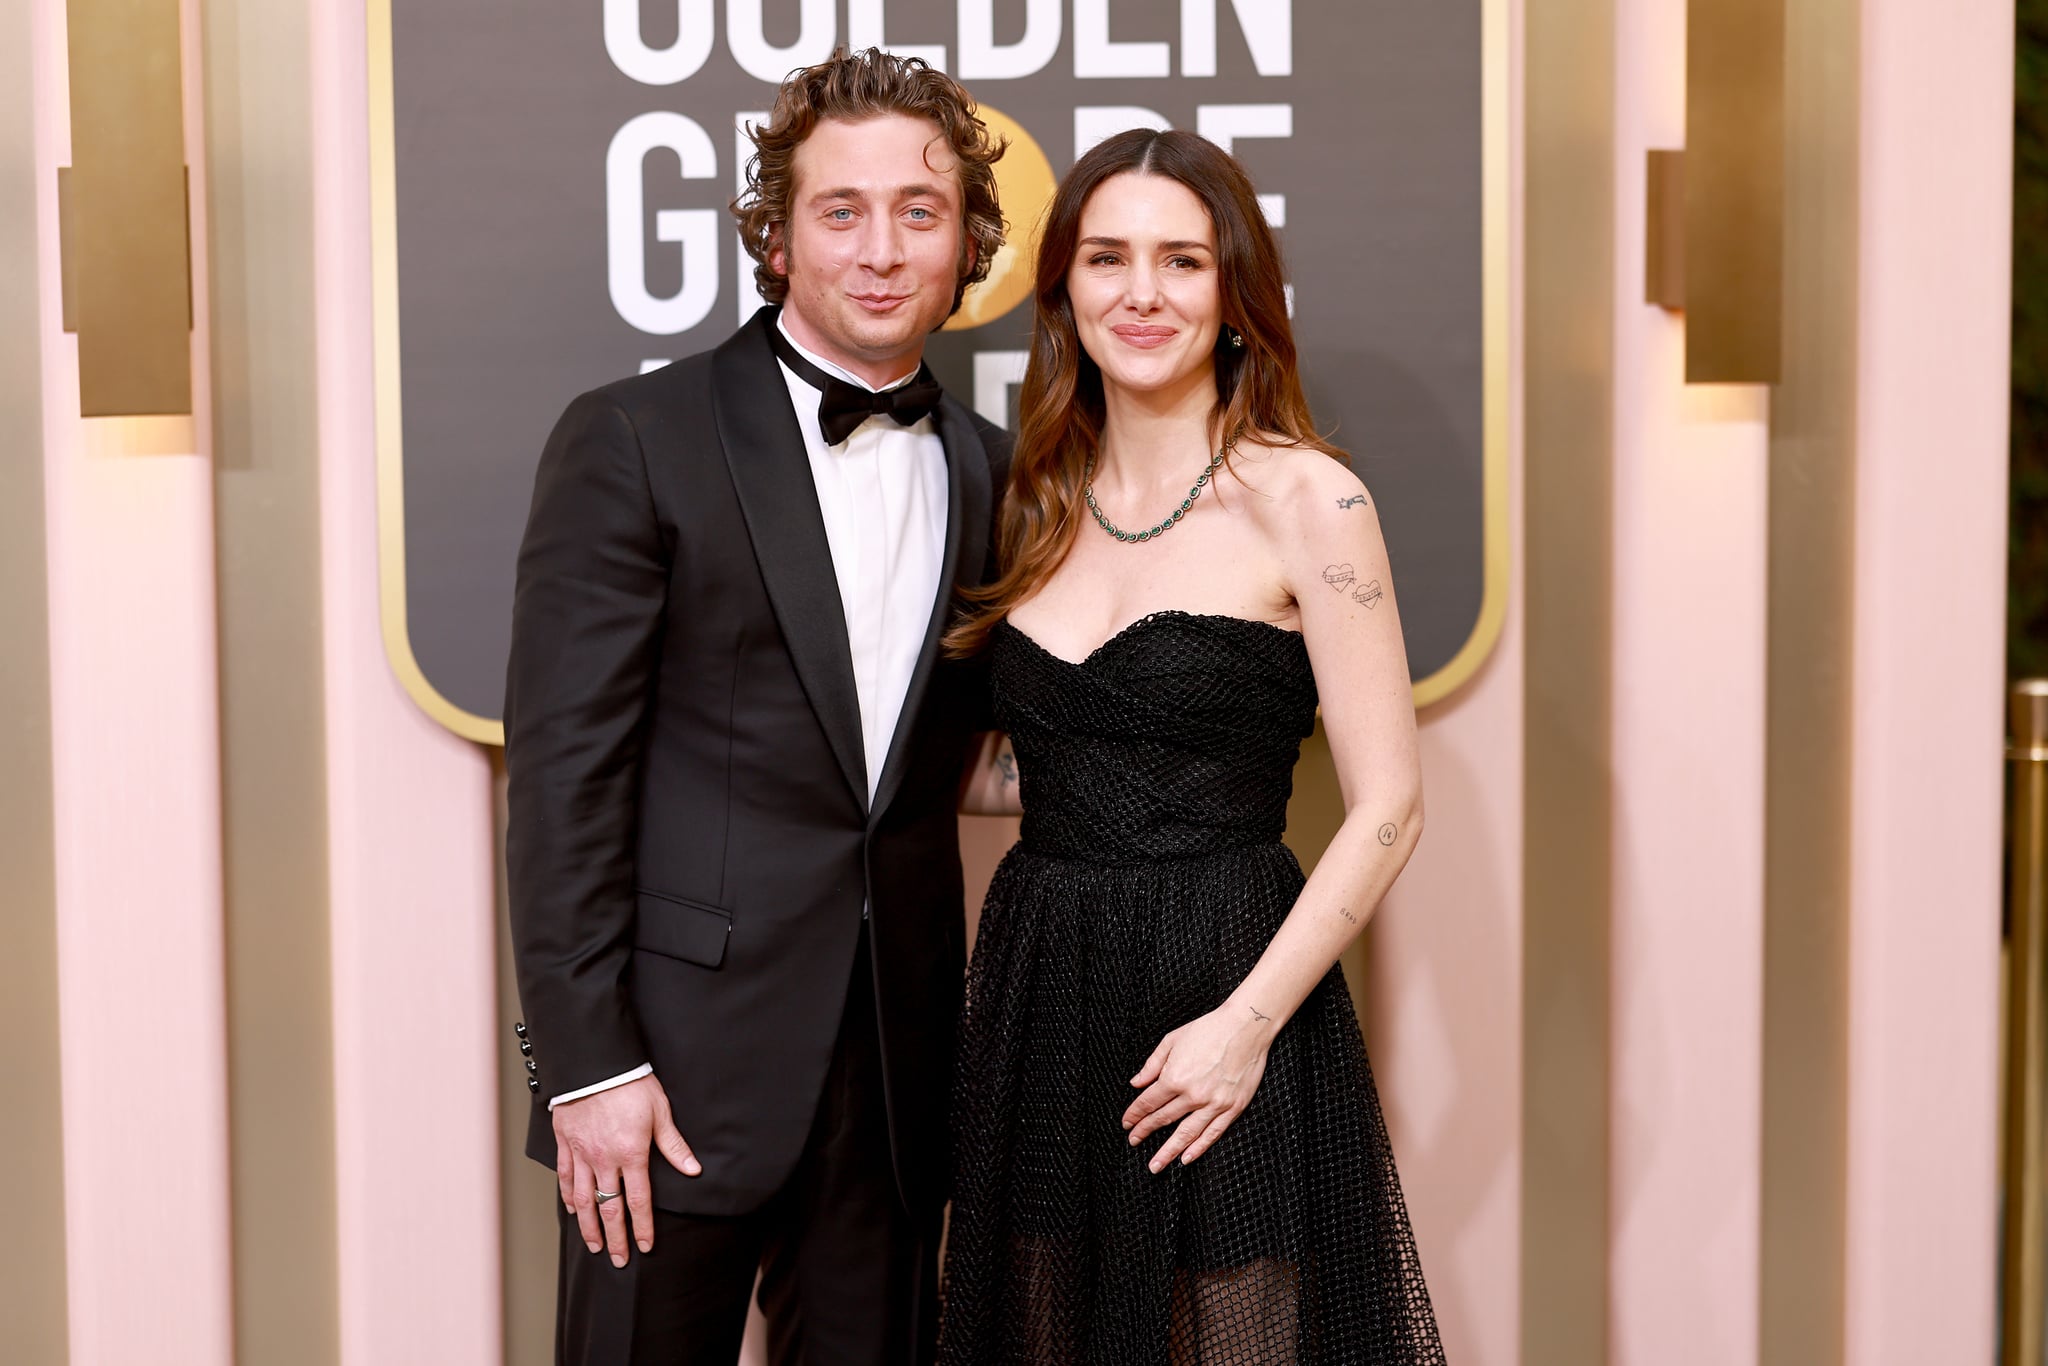 BEVERLY HILLS, CALIFORNIA - JANUARY 10: (LR) Jeremy Allen White and Addison Timlin attend the 80th Annual Golden Globe Awards at The Beverly Hilton on January 10, 2023 in Beverly Hills, California.  (Photo by Matt Winkelmeyer/FilmMagic)